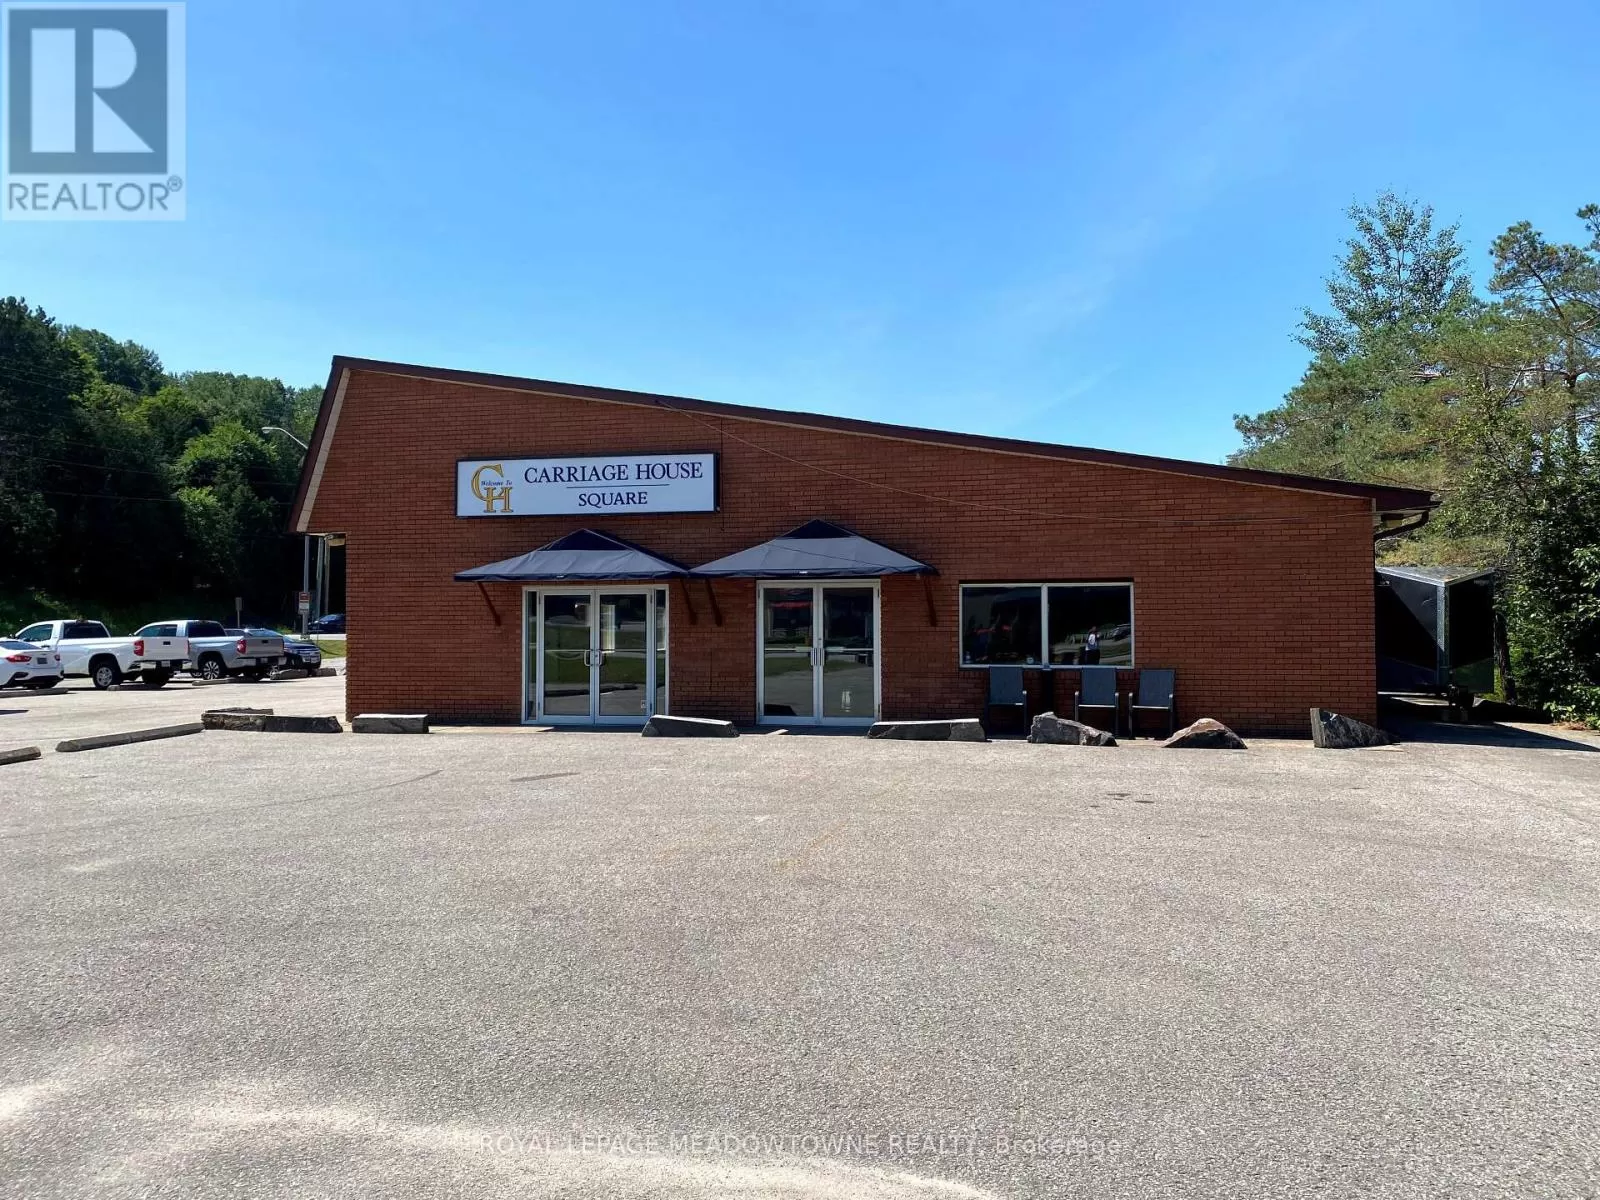 Offices for rent: #3 -5 Bobcaygeon Rd, Minden Hills, Ontario K0M 2K0